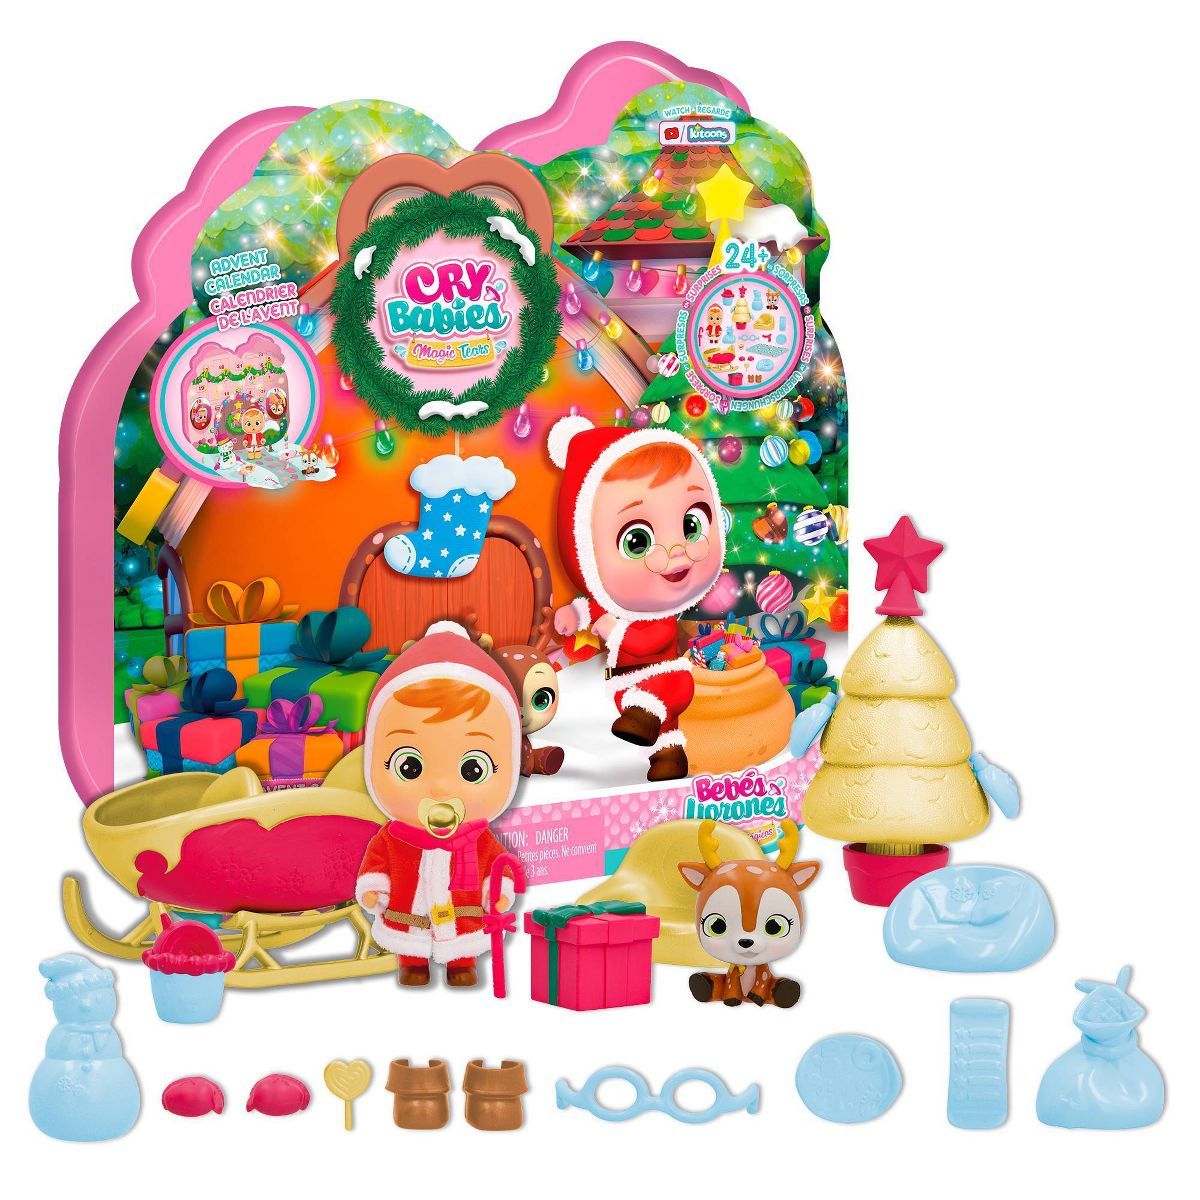 Cry Babies Magic Tears Claus' Advent Calendar with 24 Surprises | Target